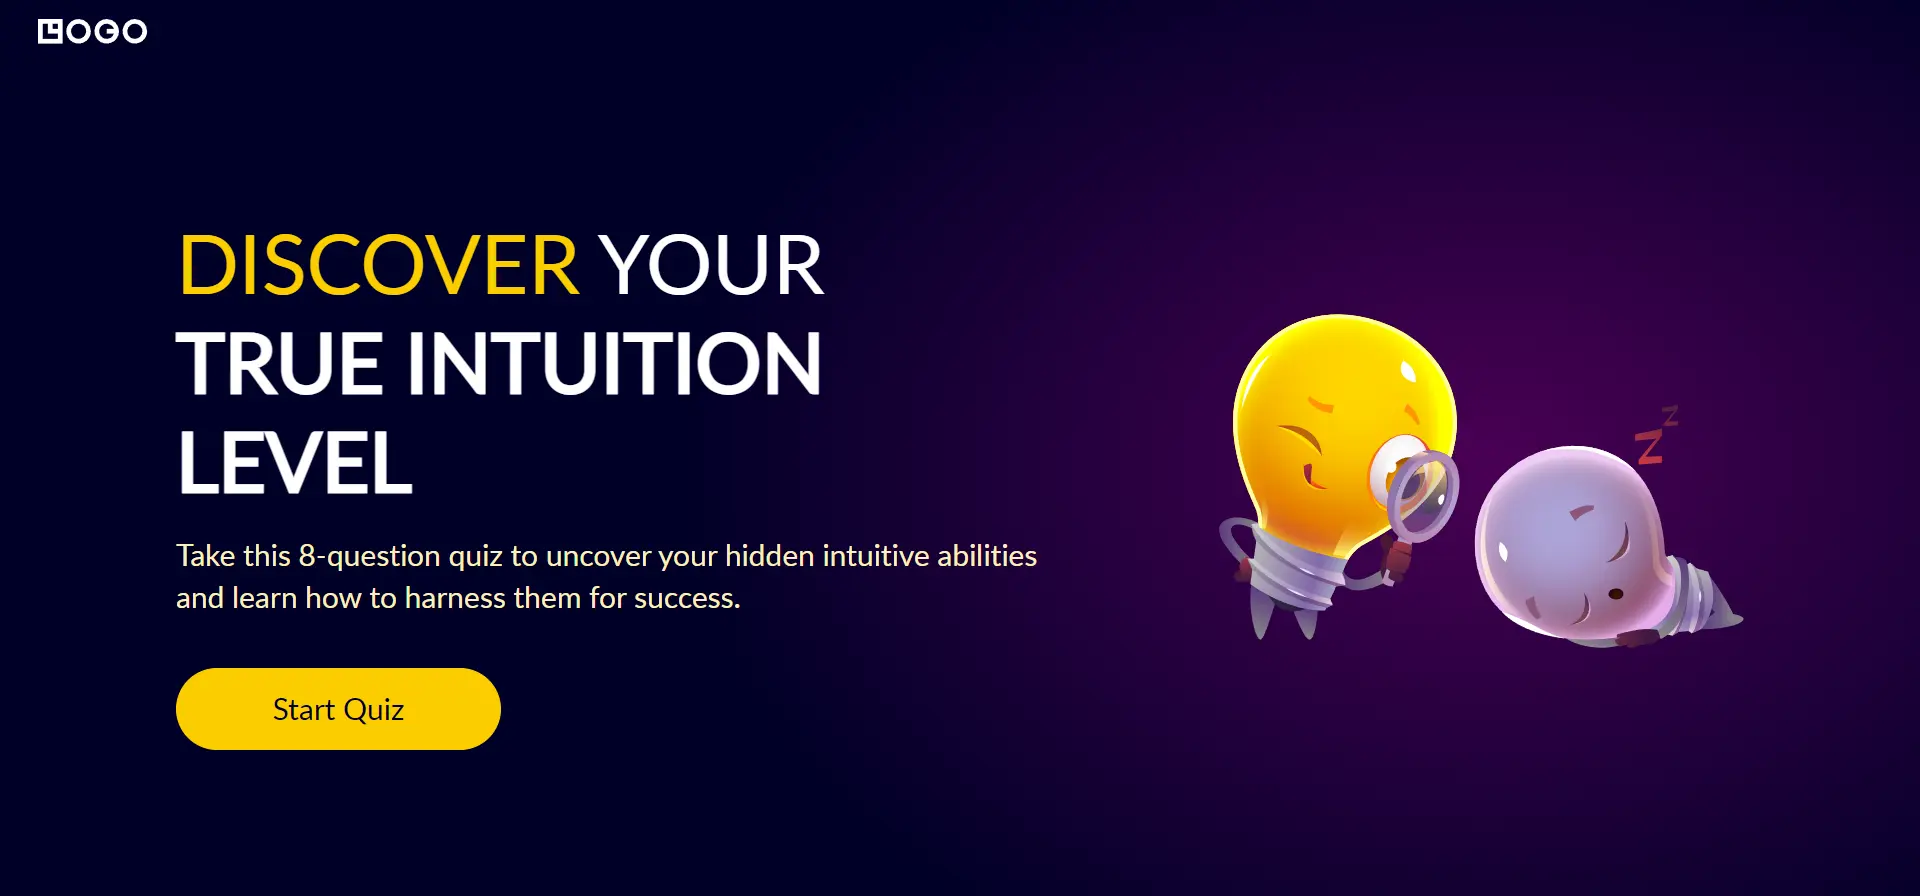 DISCOVER YOUR TRUE INTUTION LEVEL